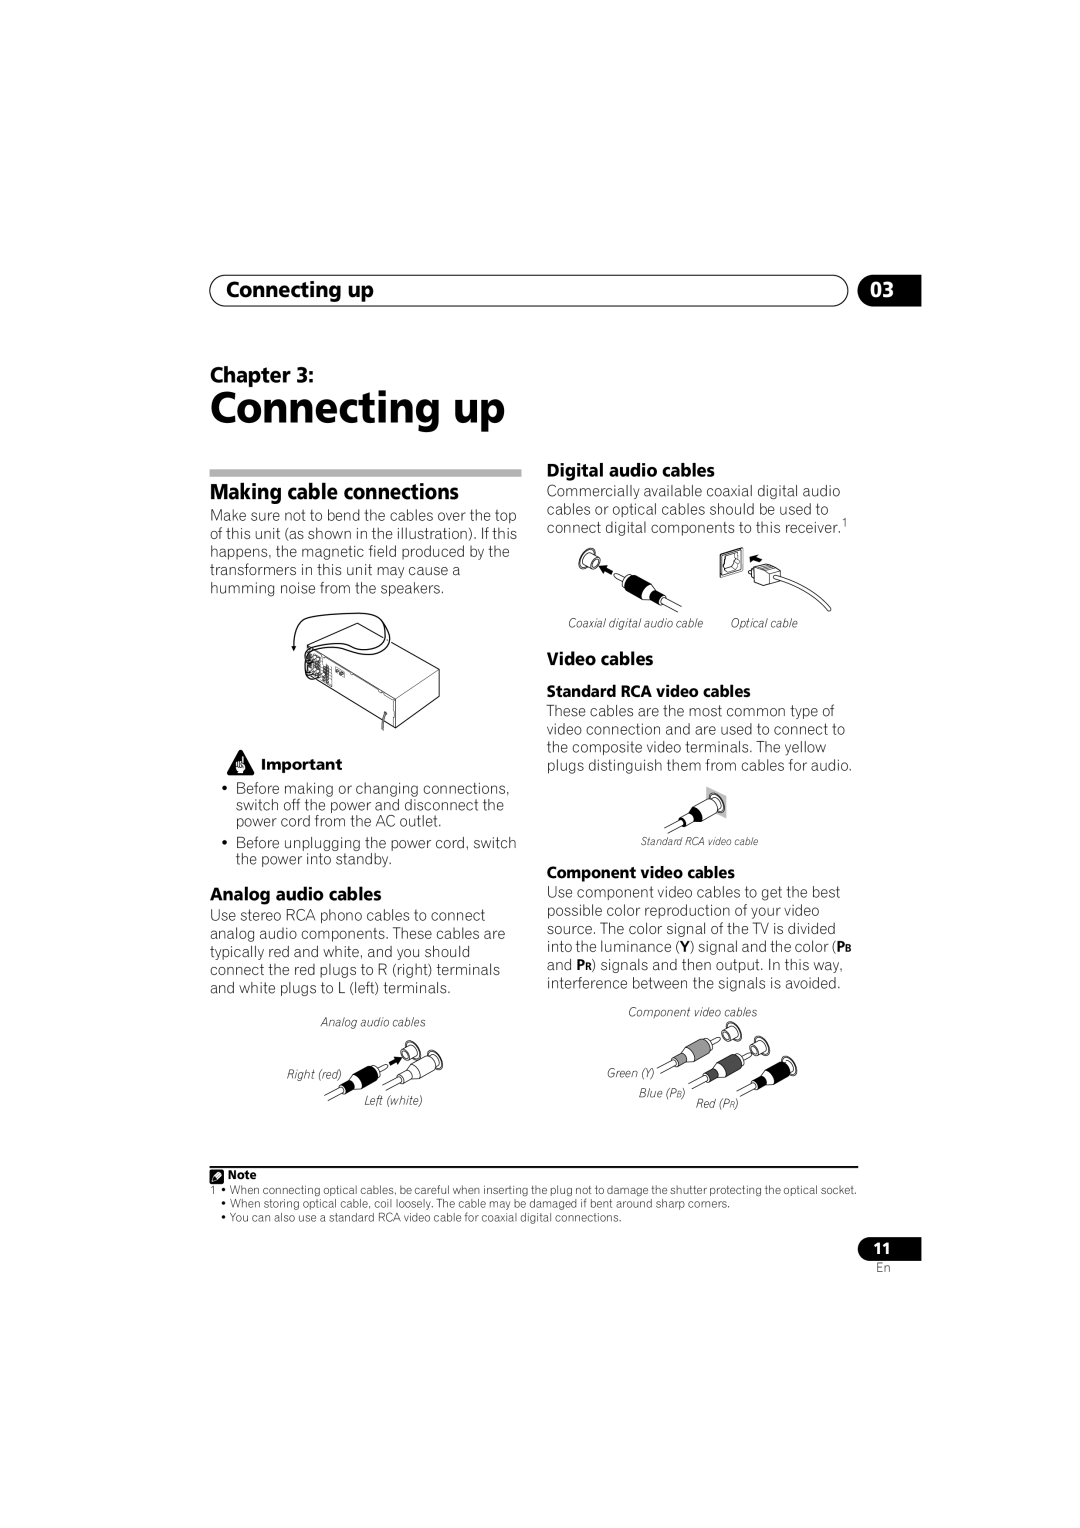 Pioneer VSX-818V-K manual Connecting up Chapter, Making cable connections, Digital audio cables, Video cables, Español 